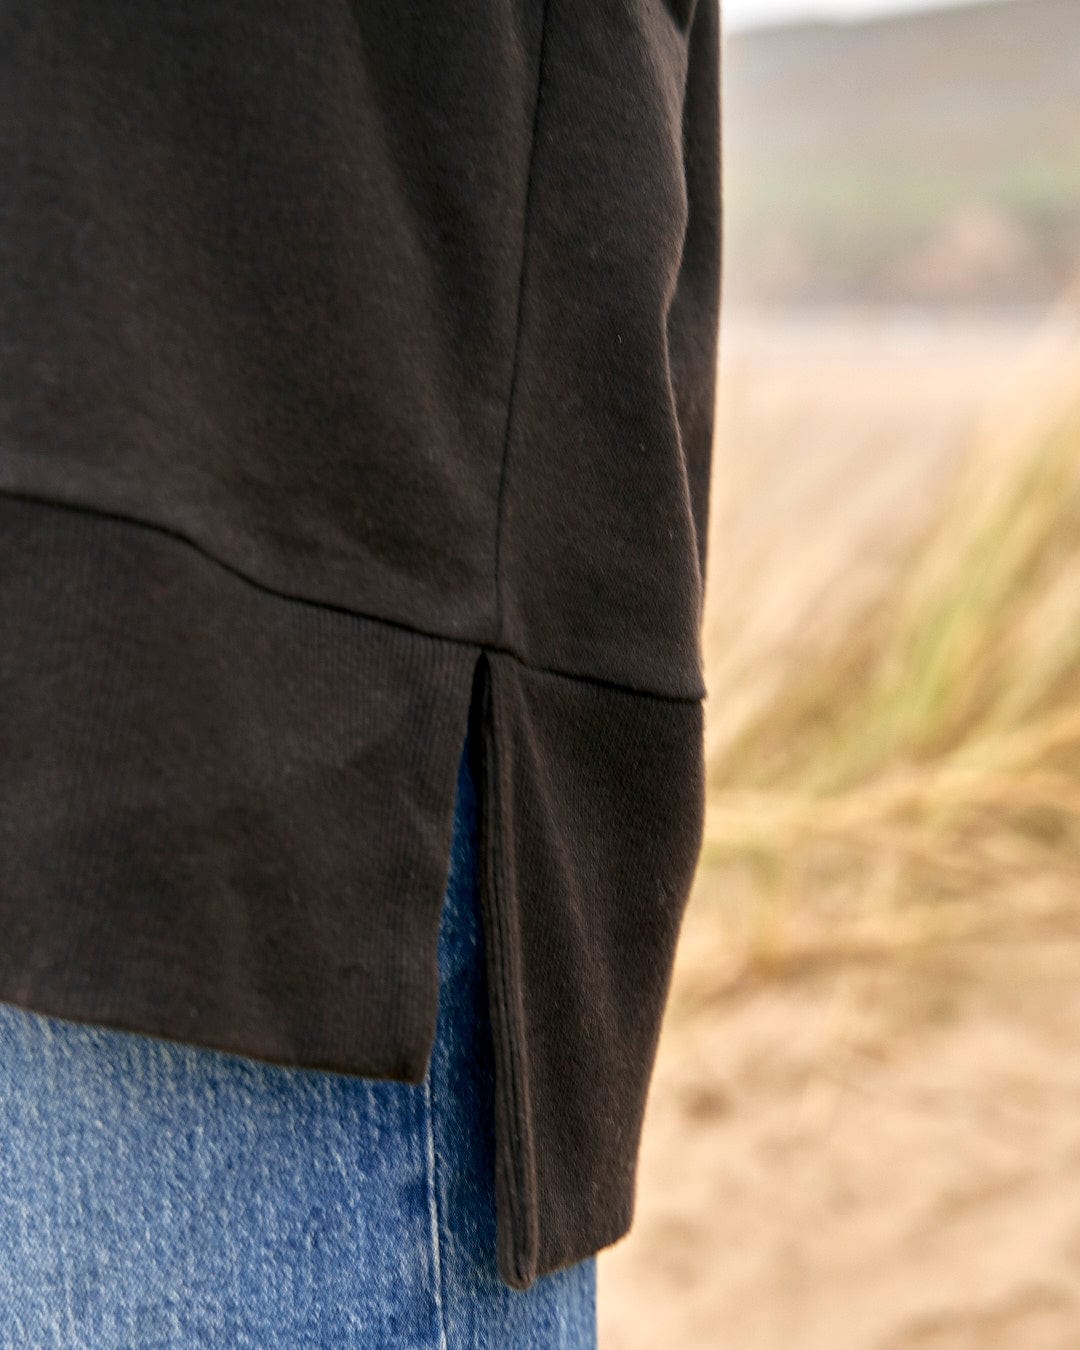 A person wearing Saltrock's Purfect Wave Gradient - Womens Boyfriend Fit Sweat - Black jeans and a black hoodie on a beach.